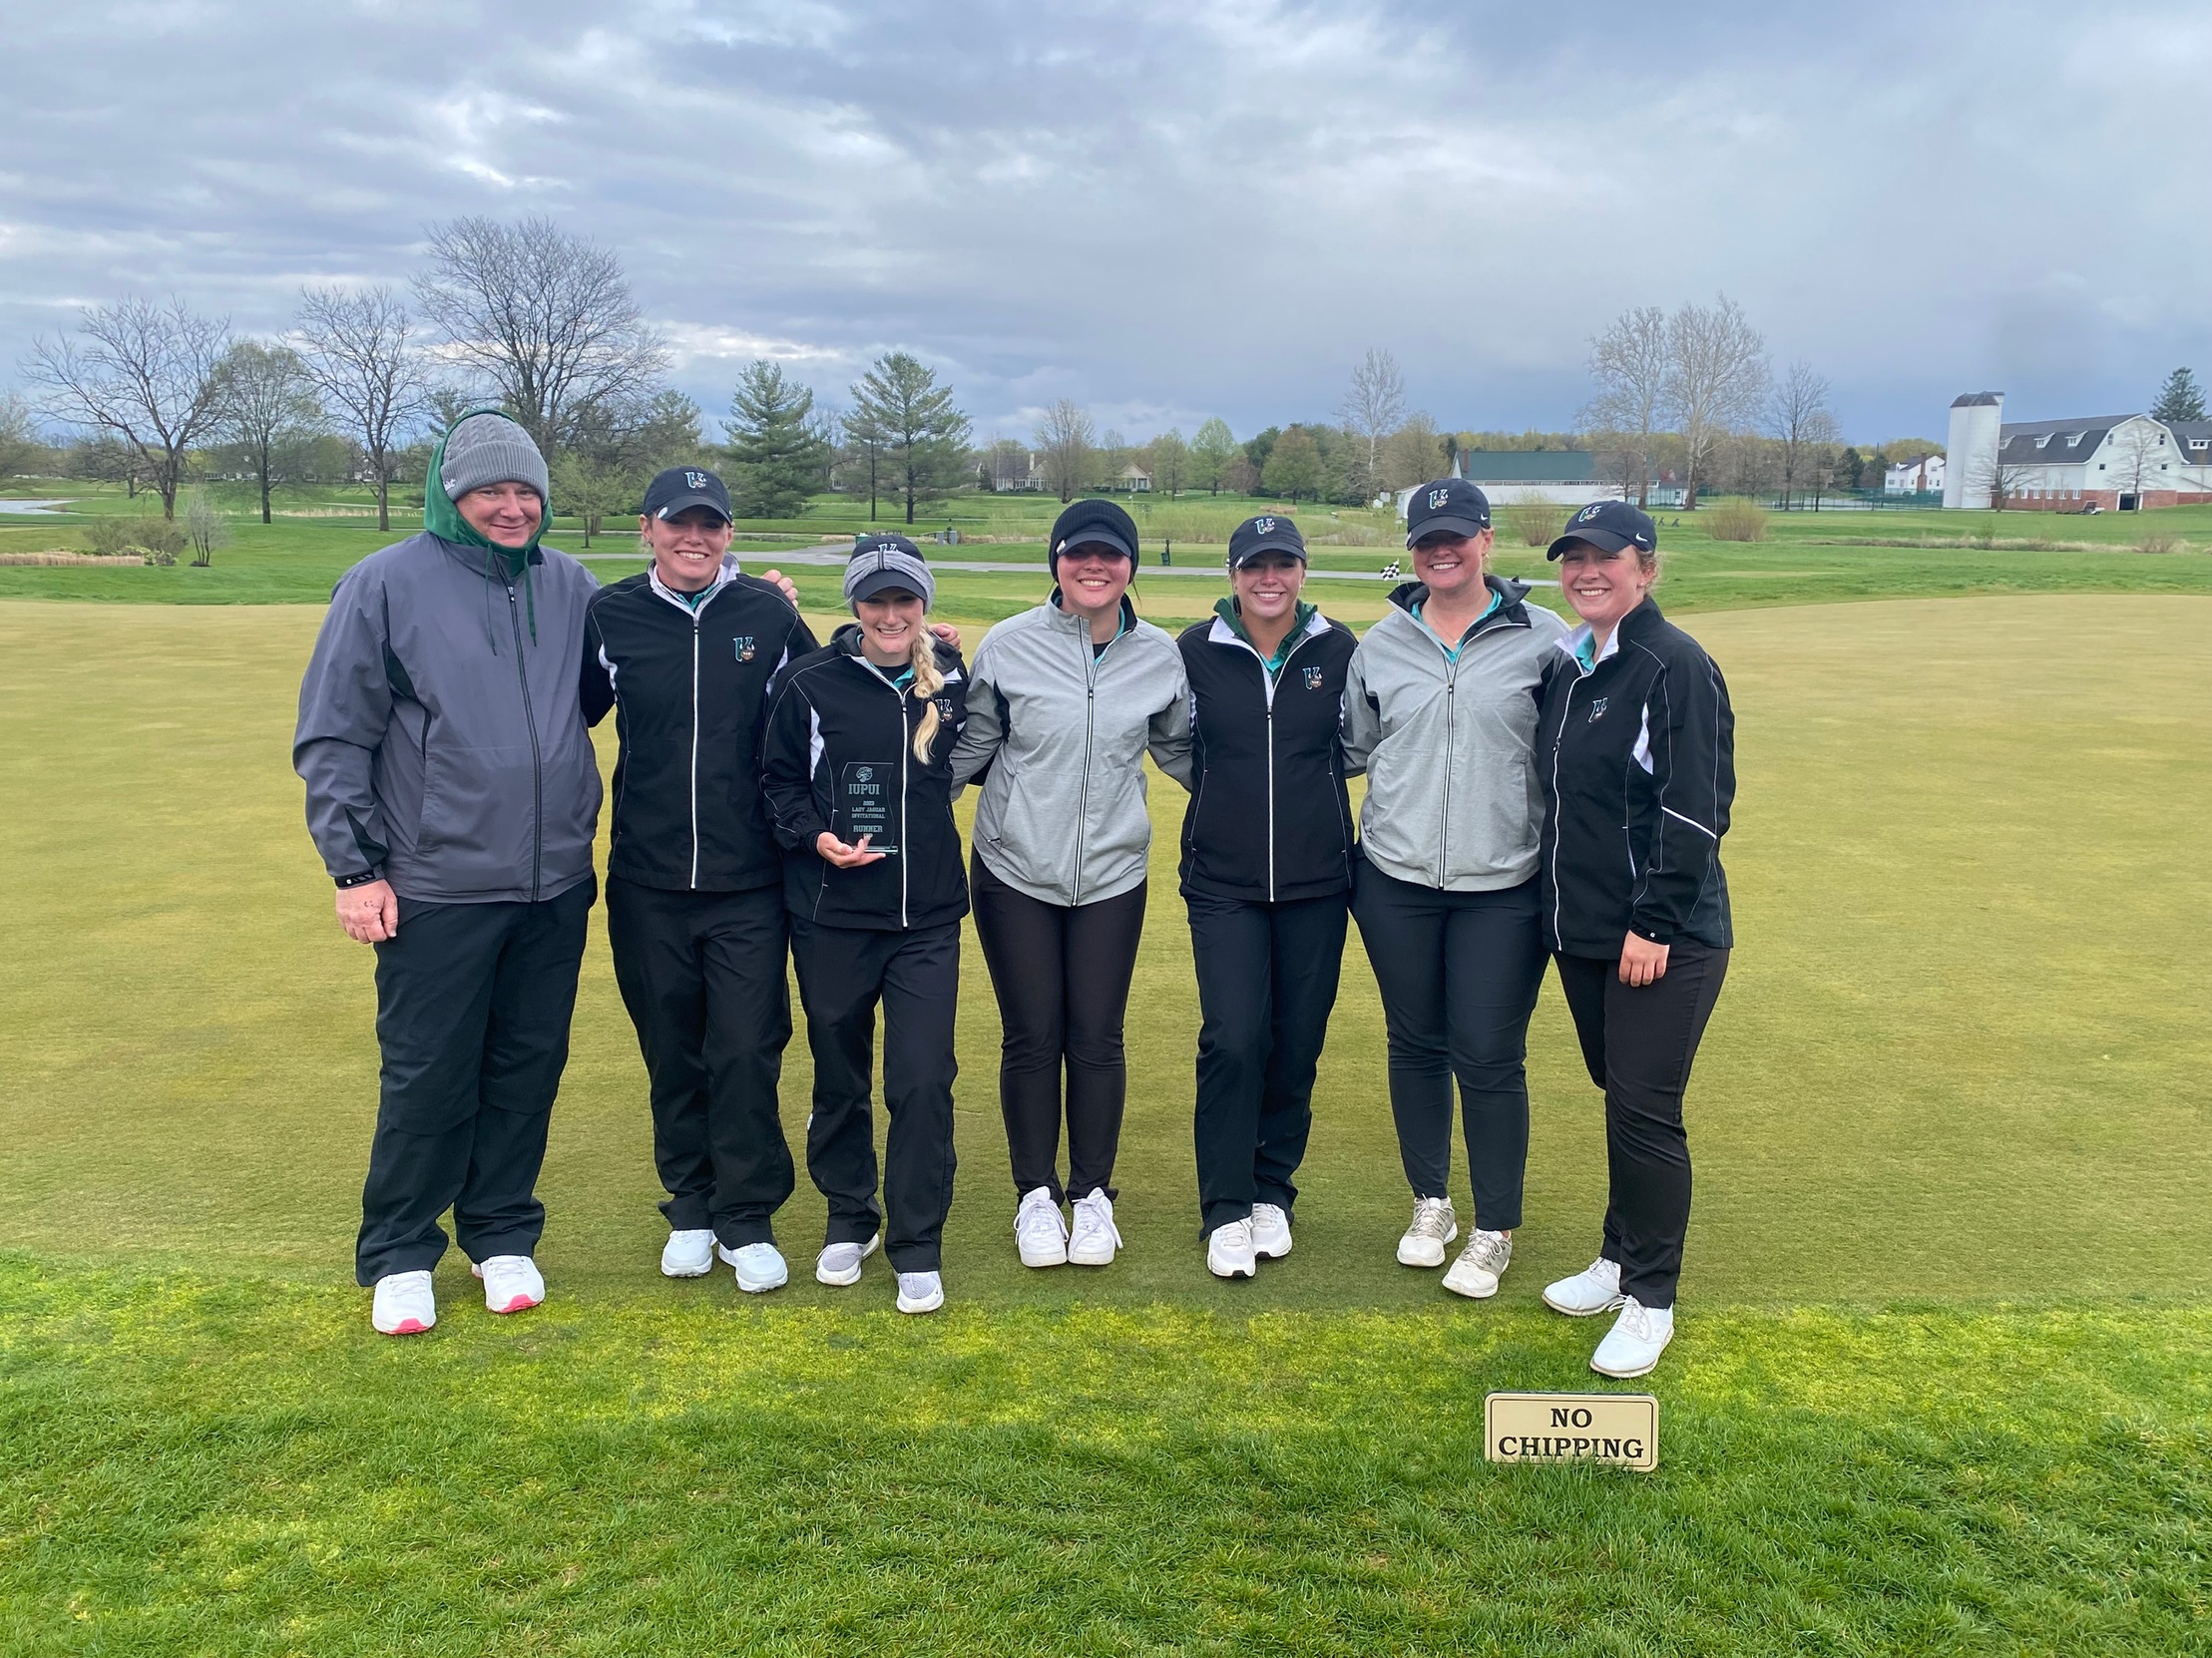 Brynna Mardis wins Medalist Honors in Playoff, Cleveland State Women’s Golf Second at IUPUI Lady Jaguar Invite